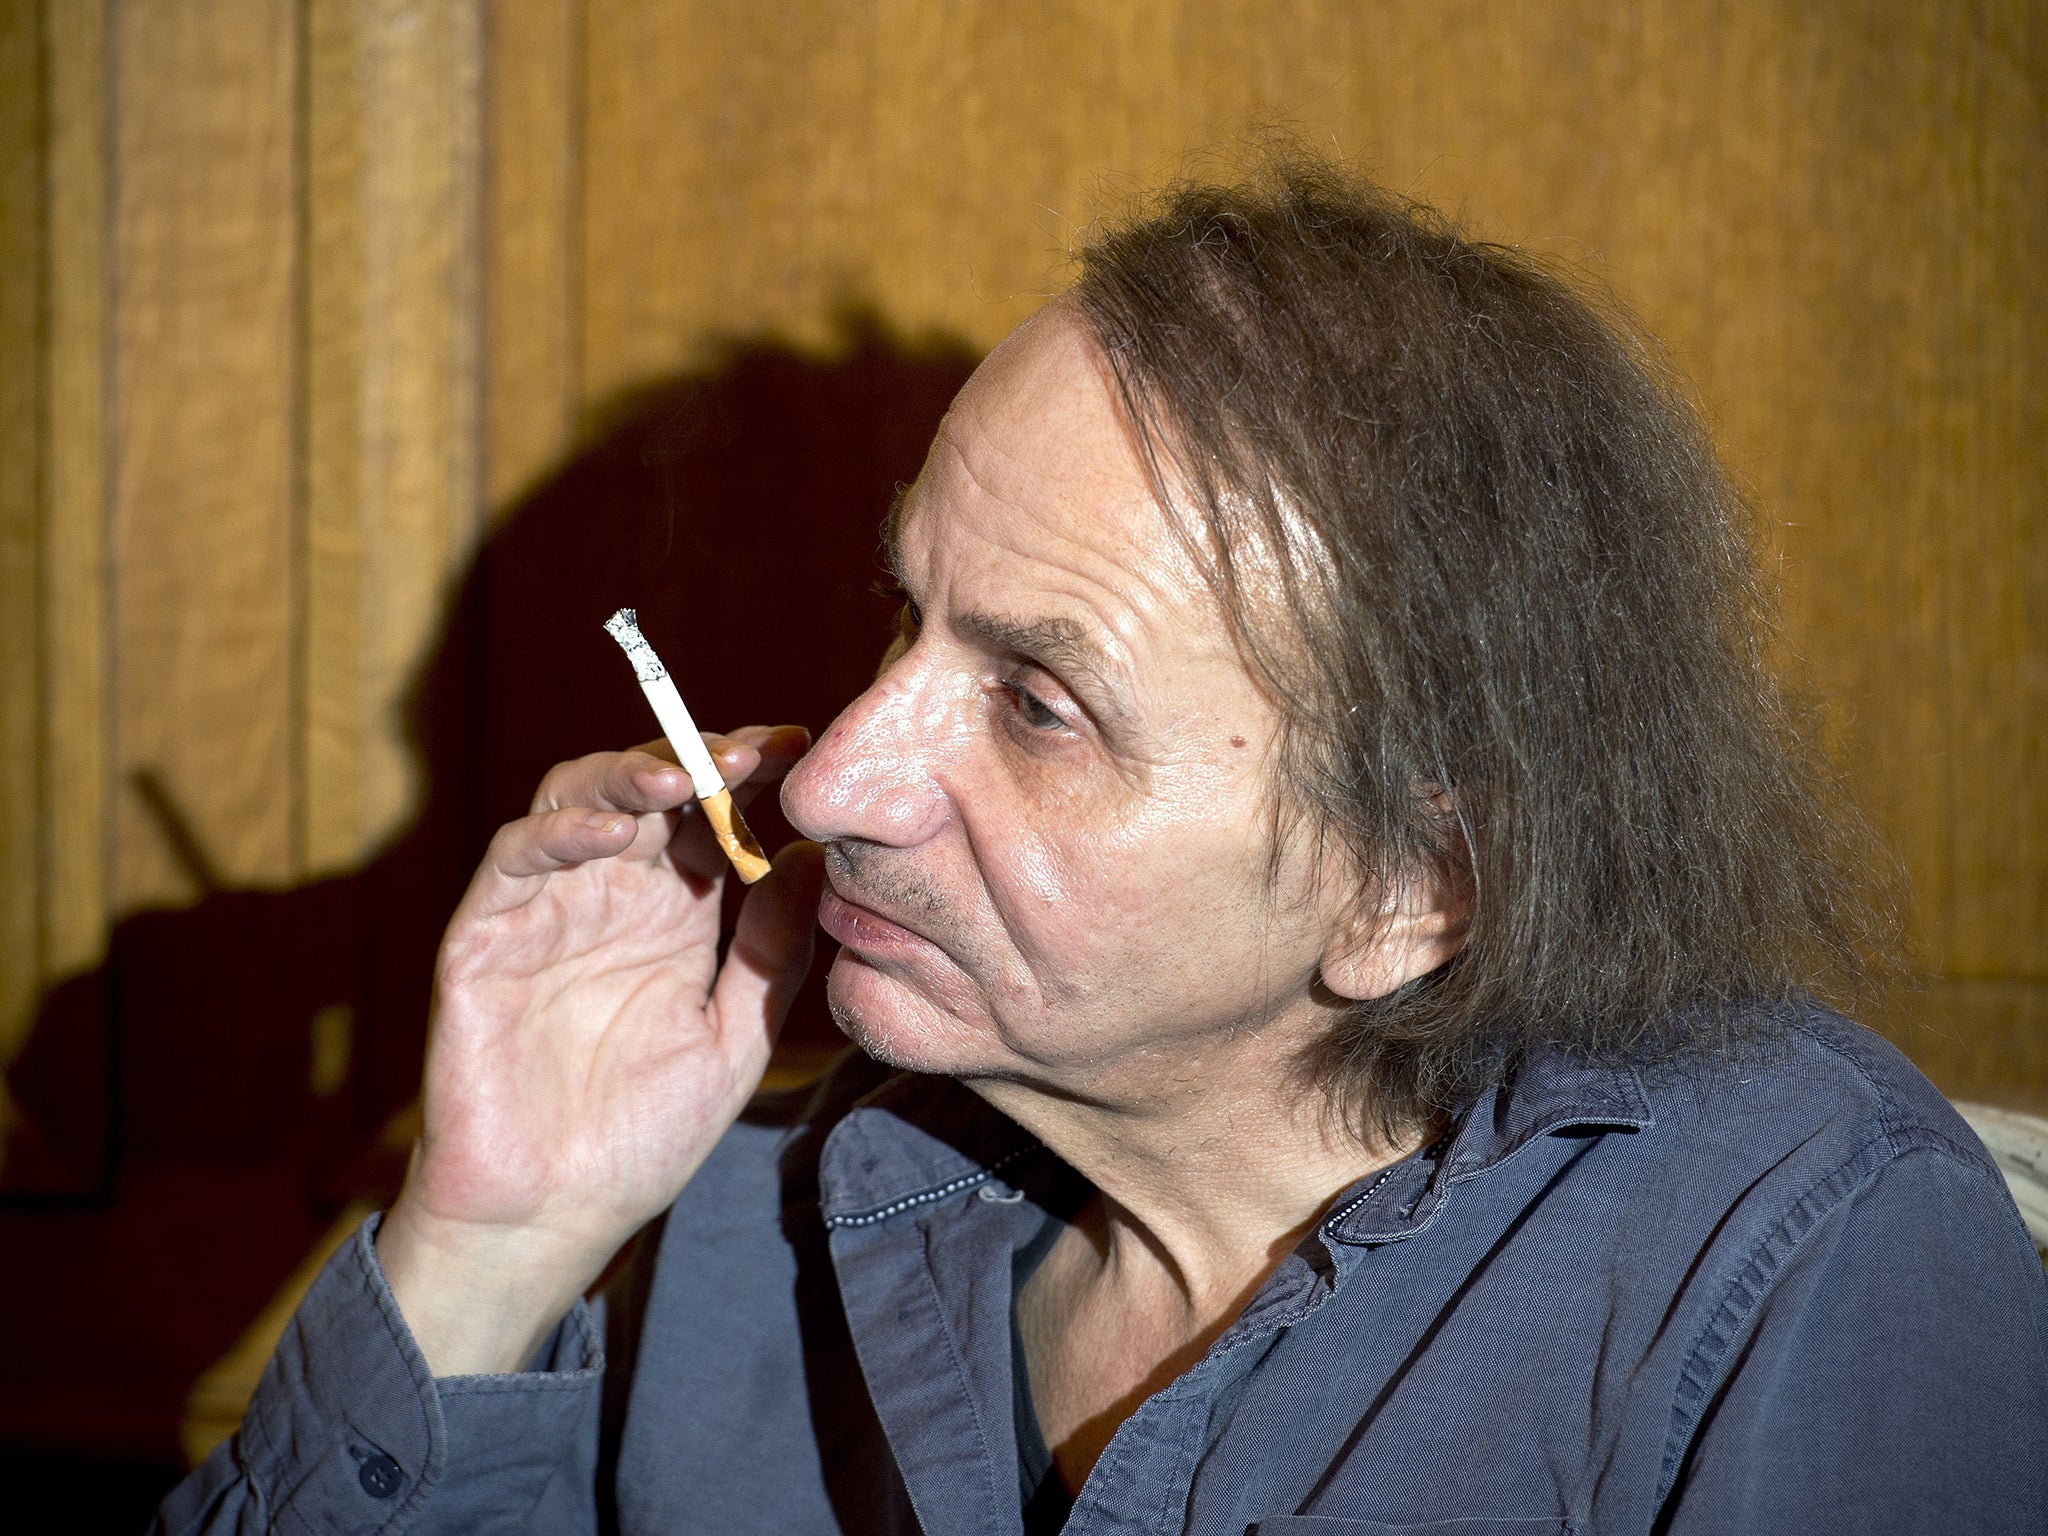 In a statement to the French news agency, Houellebecq described journalists as 'parasites' and 'cockroaches'